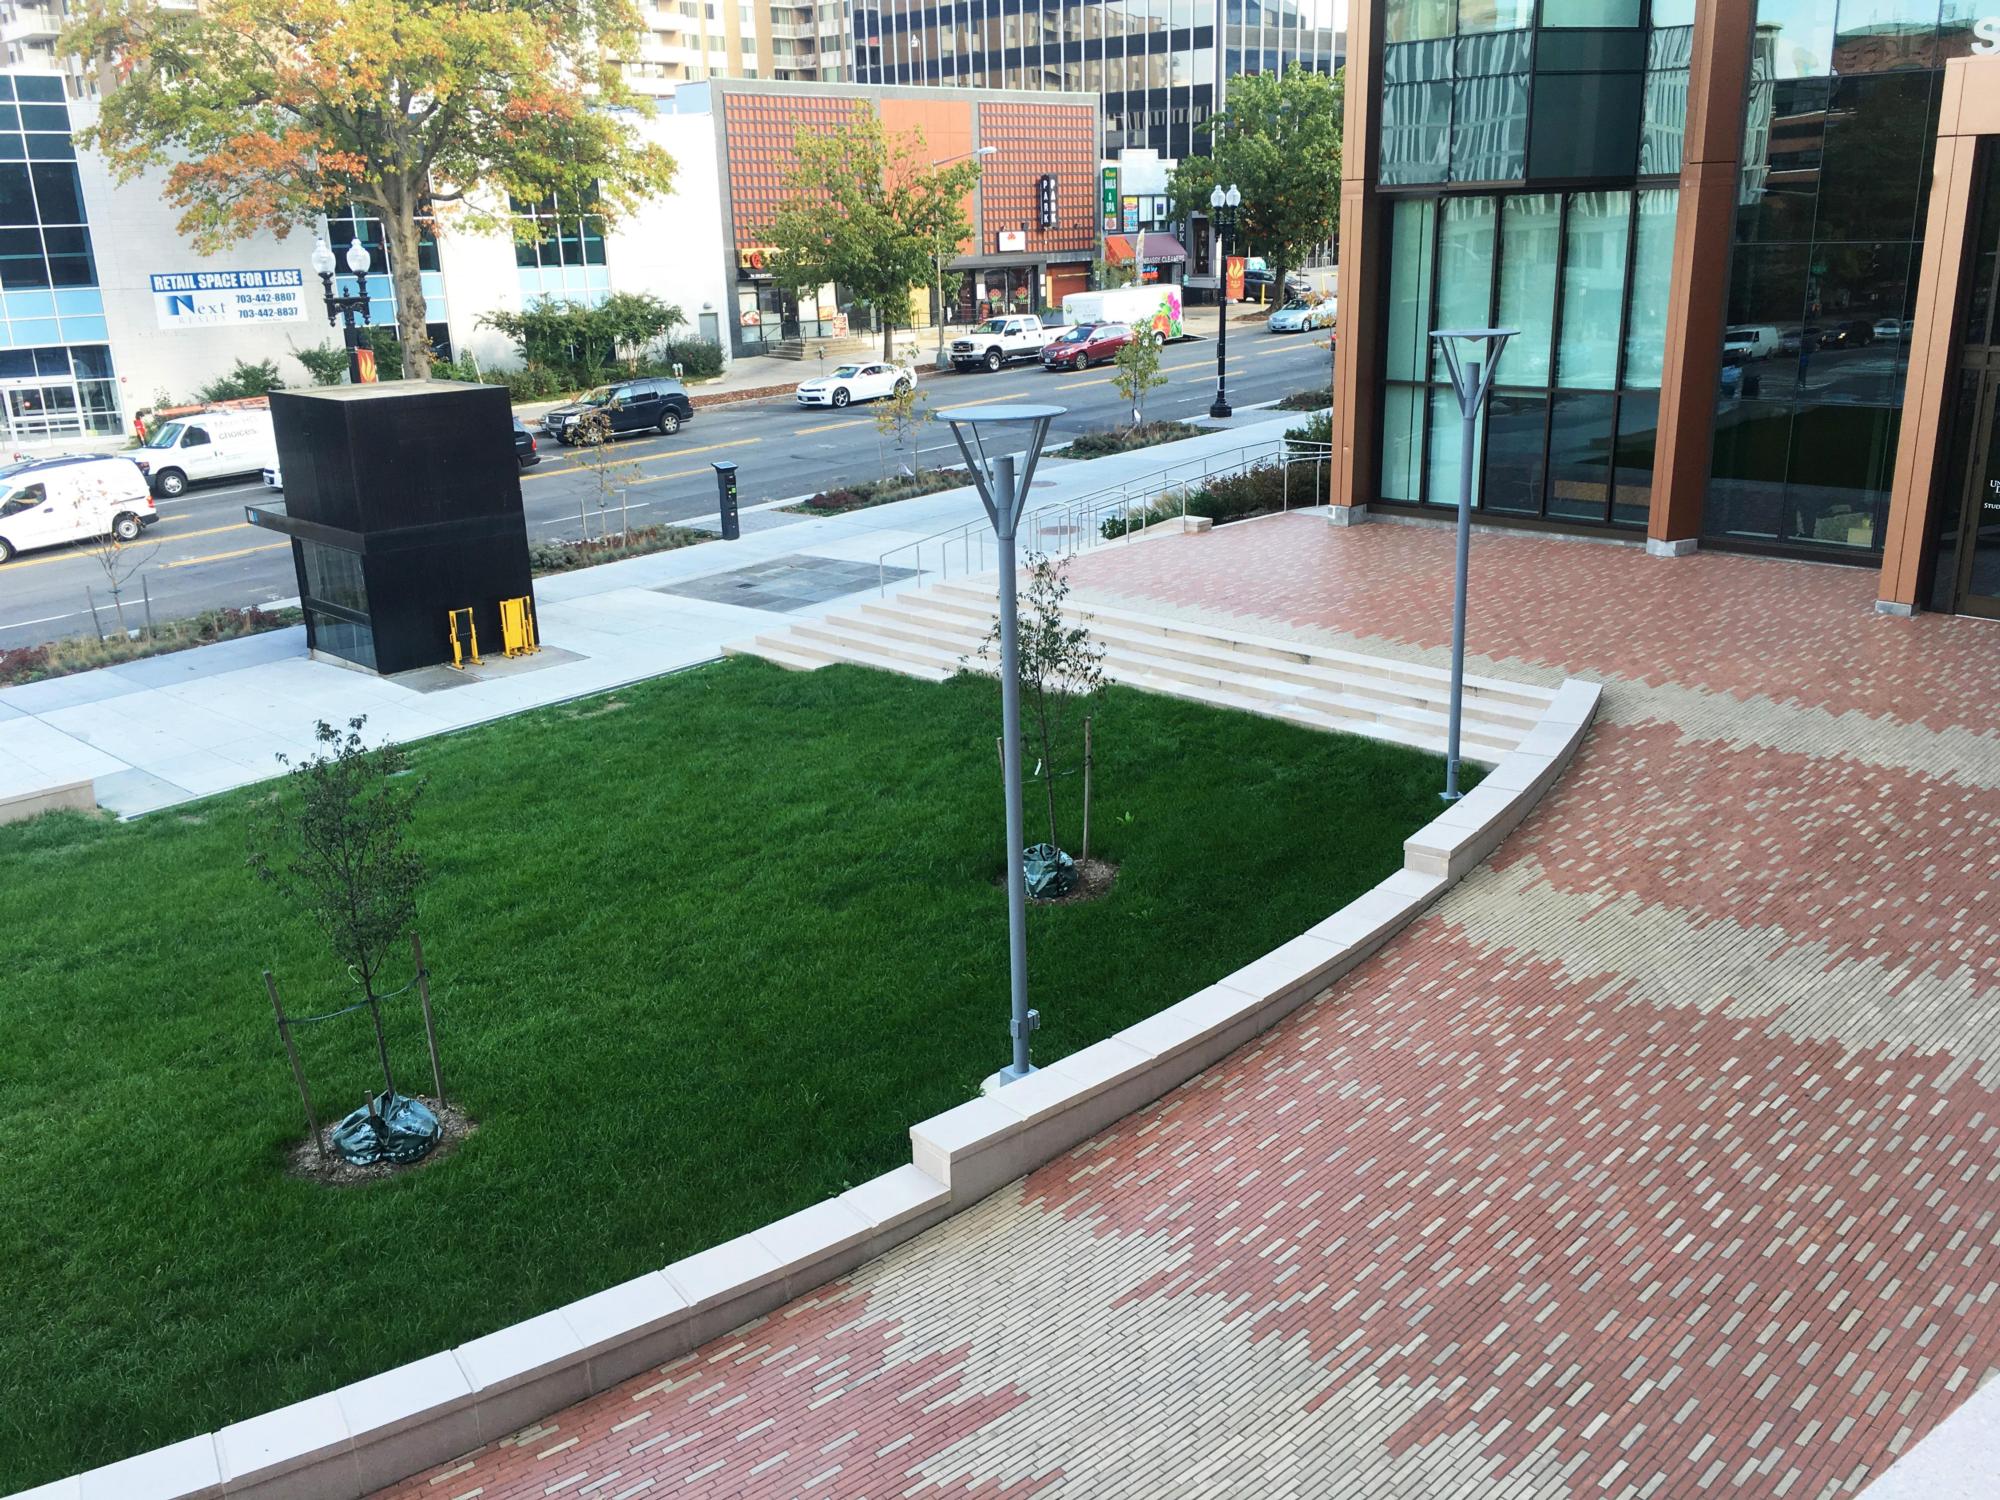 Image of the brick paving and manicured, green lawn at the University of the District of Columbia Student Center